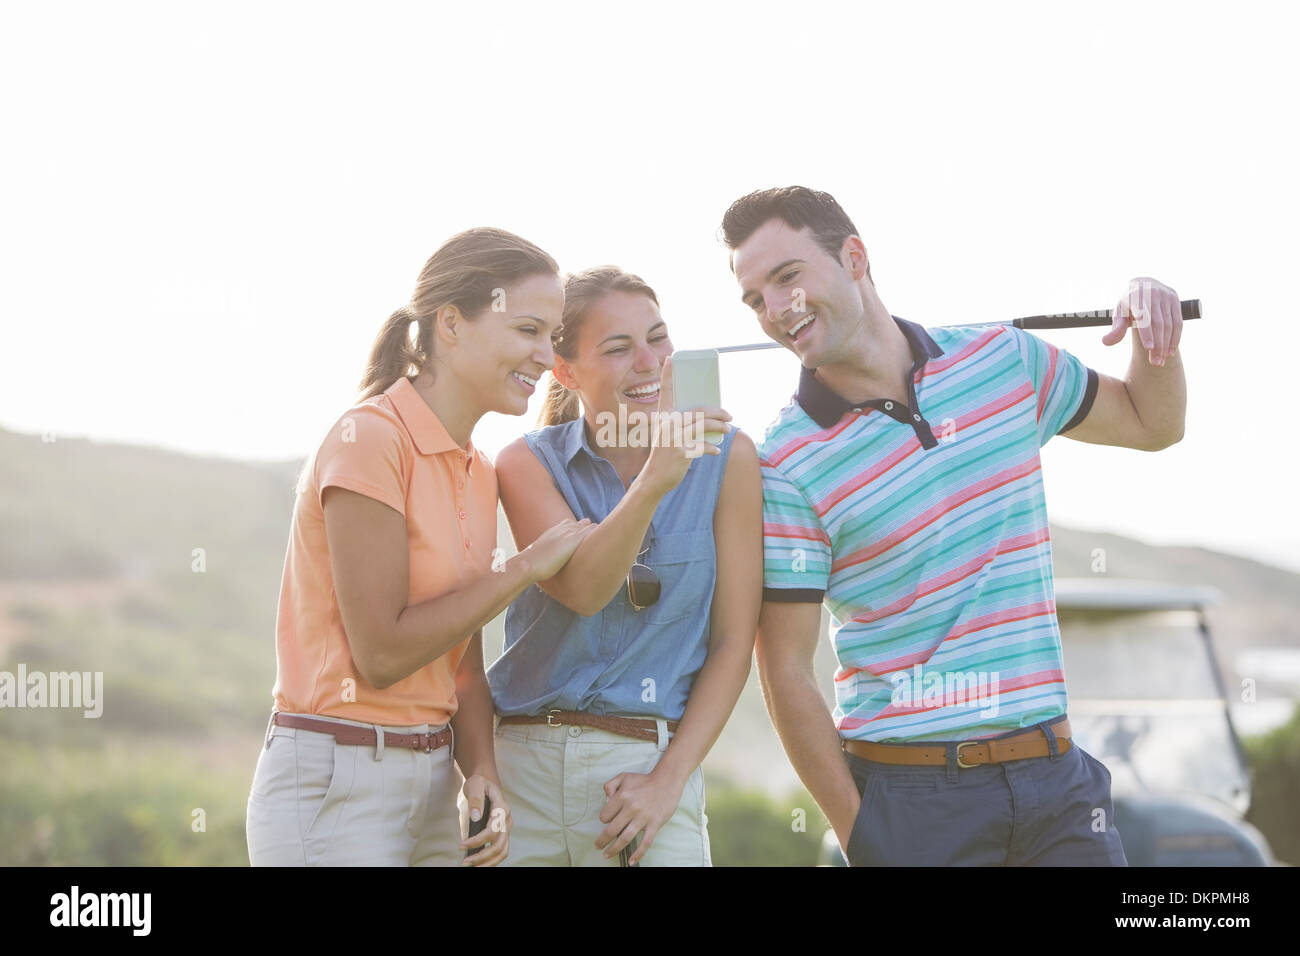 Friends looking at cell phone on golf course Stock Photo